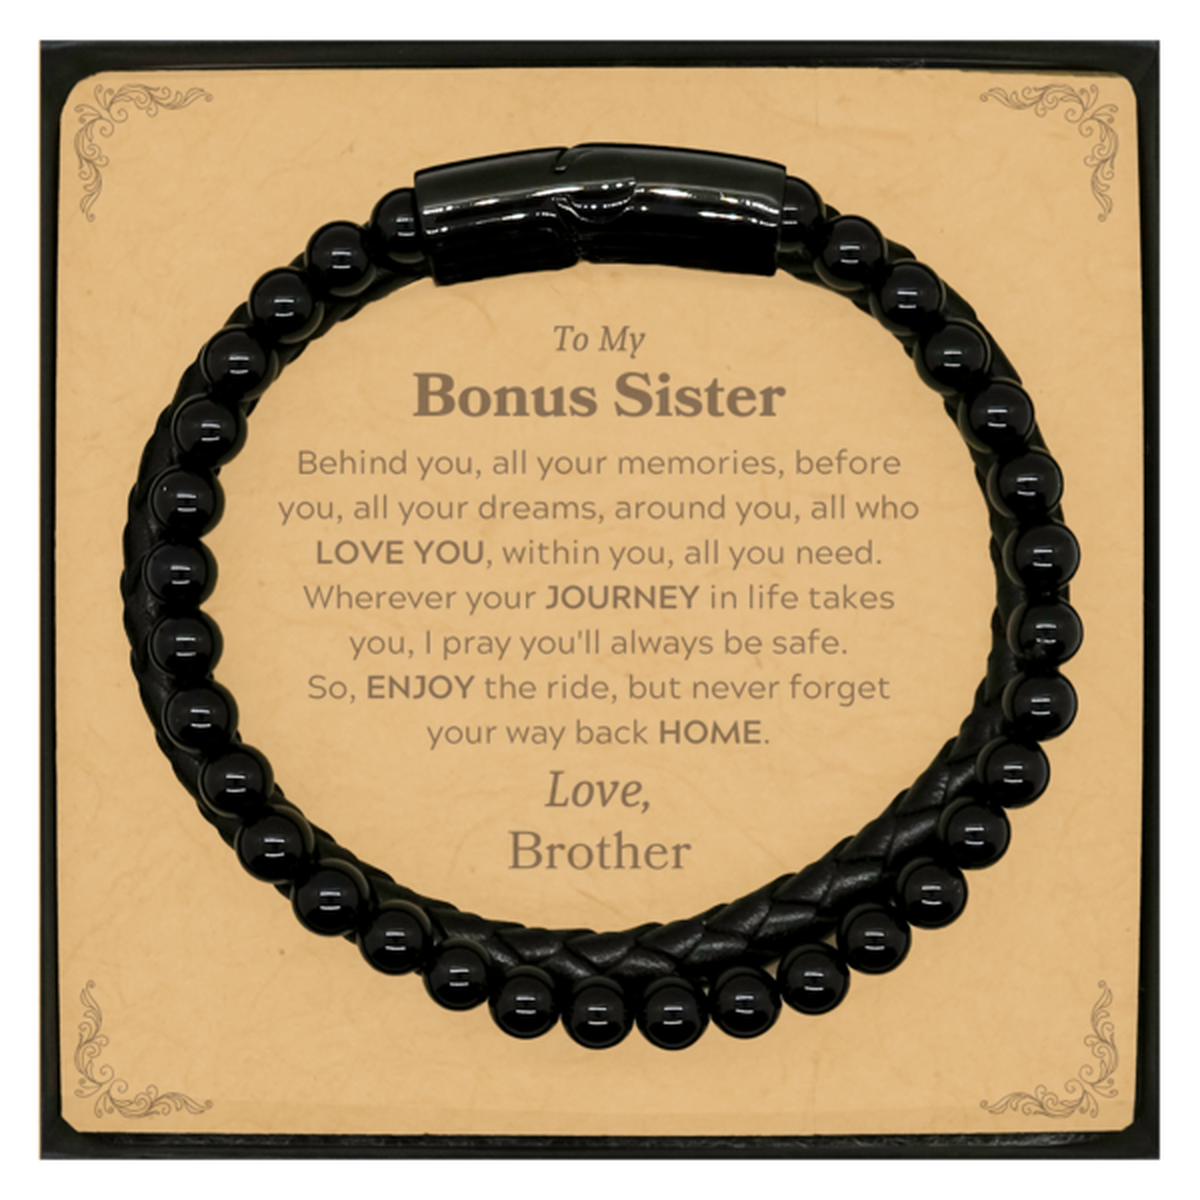 To My Bonus Sister Graduation Gifts from Brother, Bonus Sister Stone Leather Bracelets Christmas Birthday Gifts for Bonus Sister Behind you, all your memories, before you, all your dreams. Love, Brother